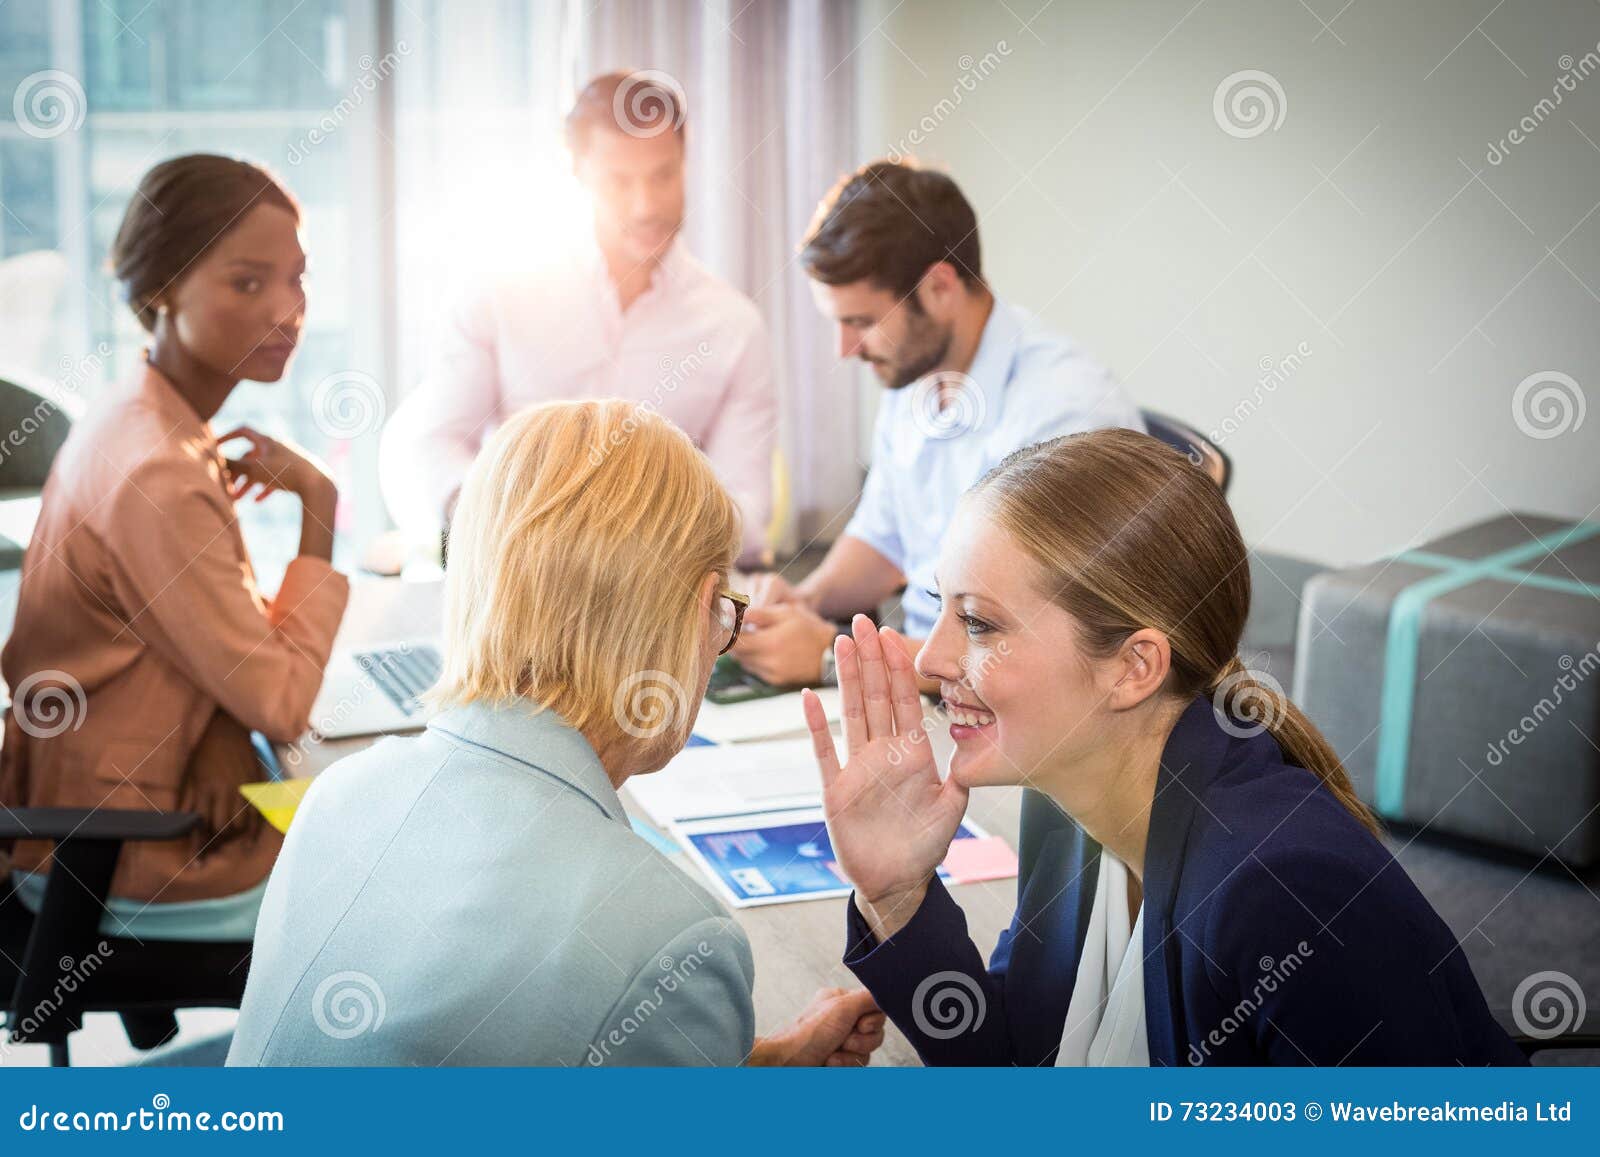 6 029 People Gossiping Photos Free Royalty Free Stock Photos From Dreamstime